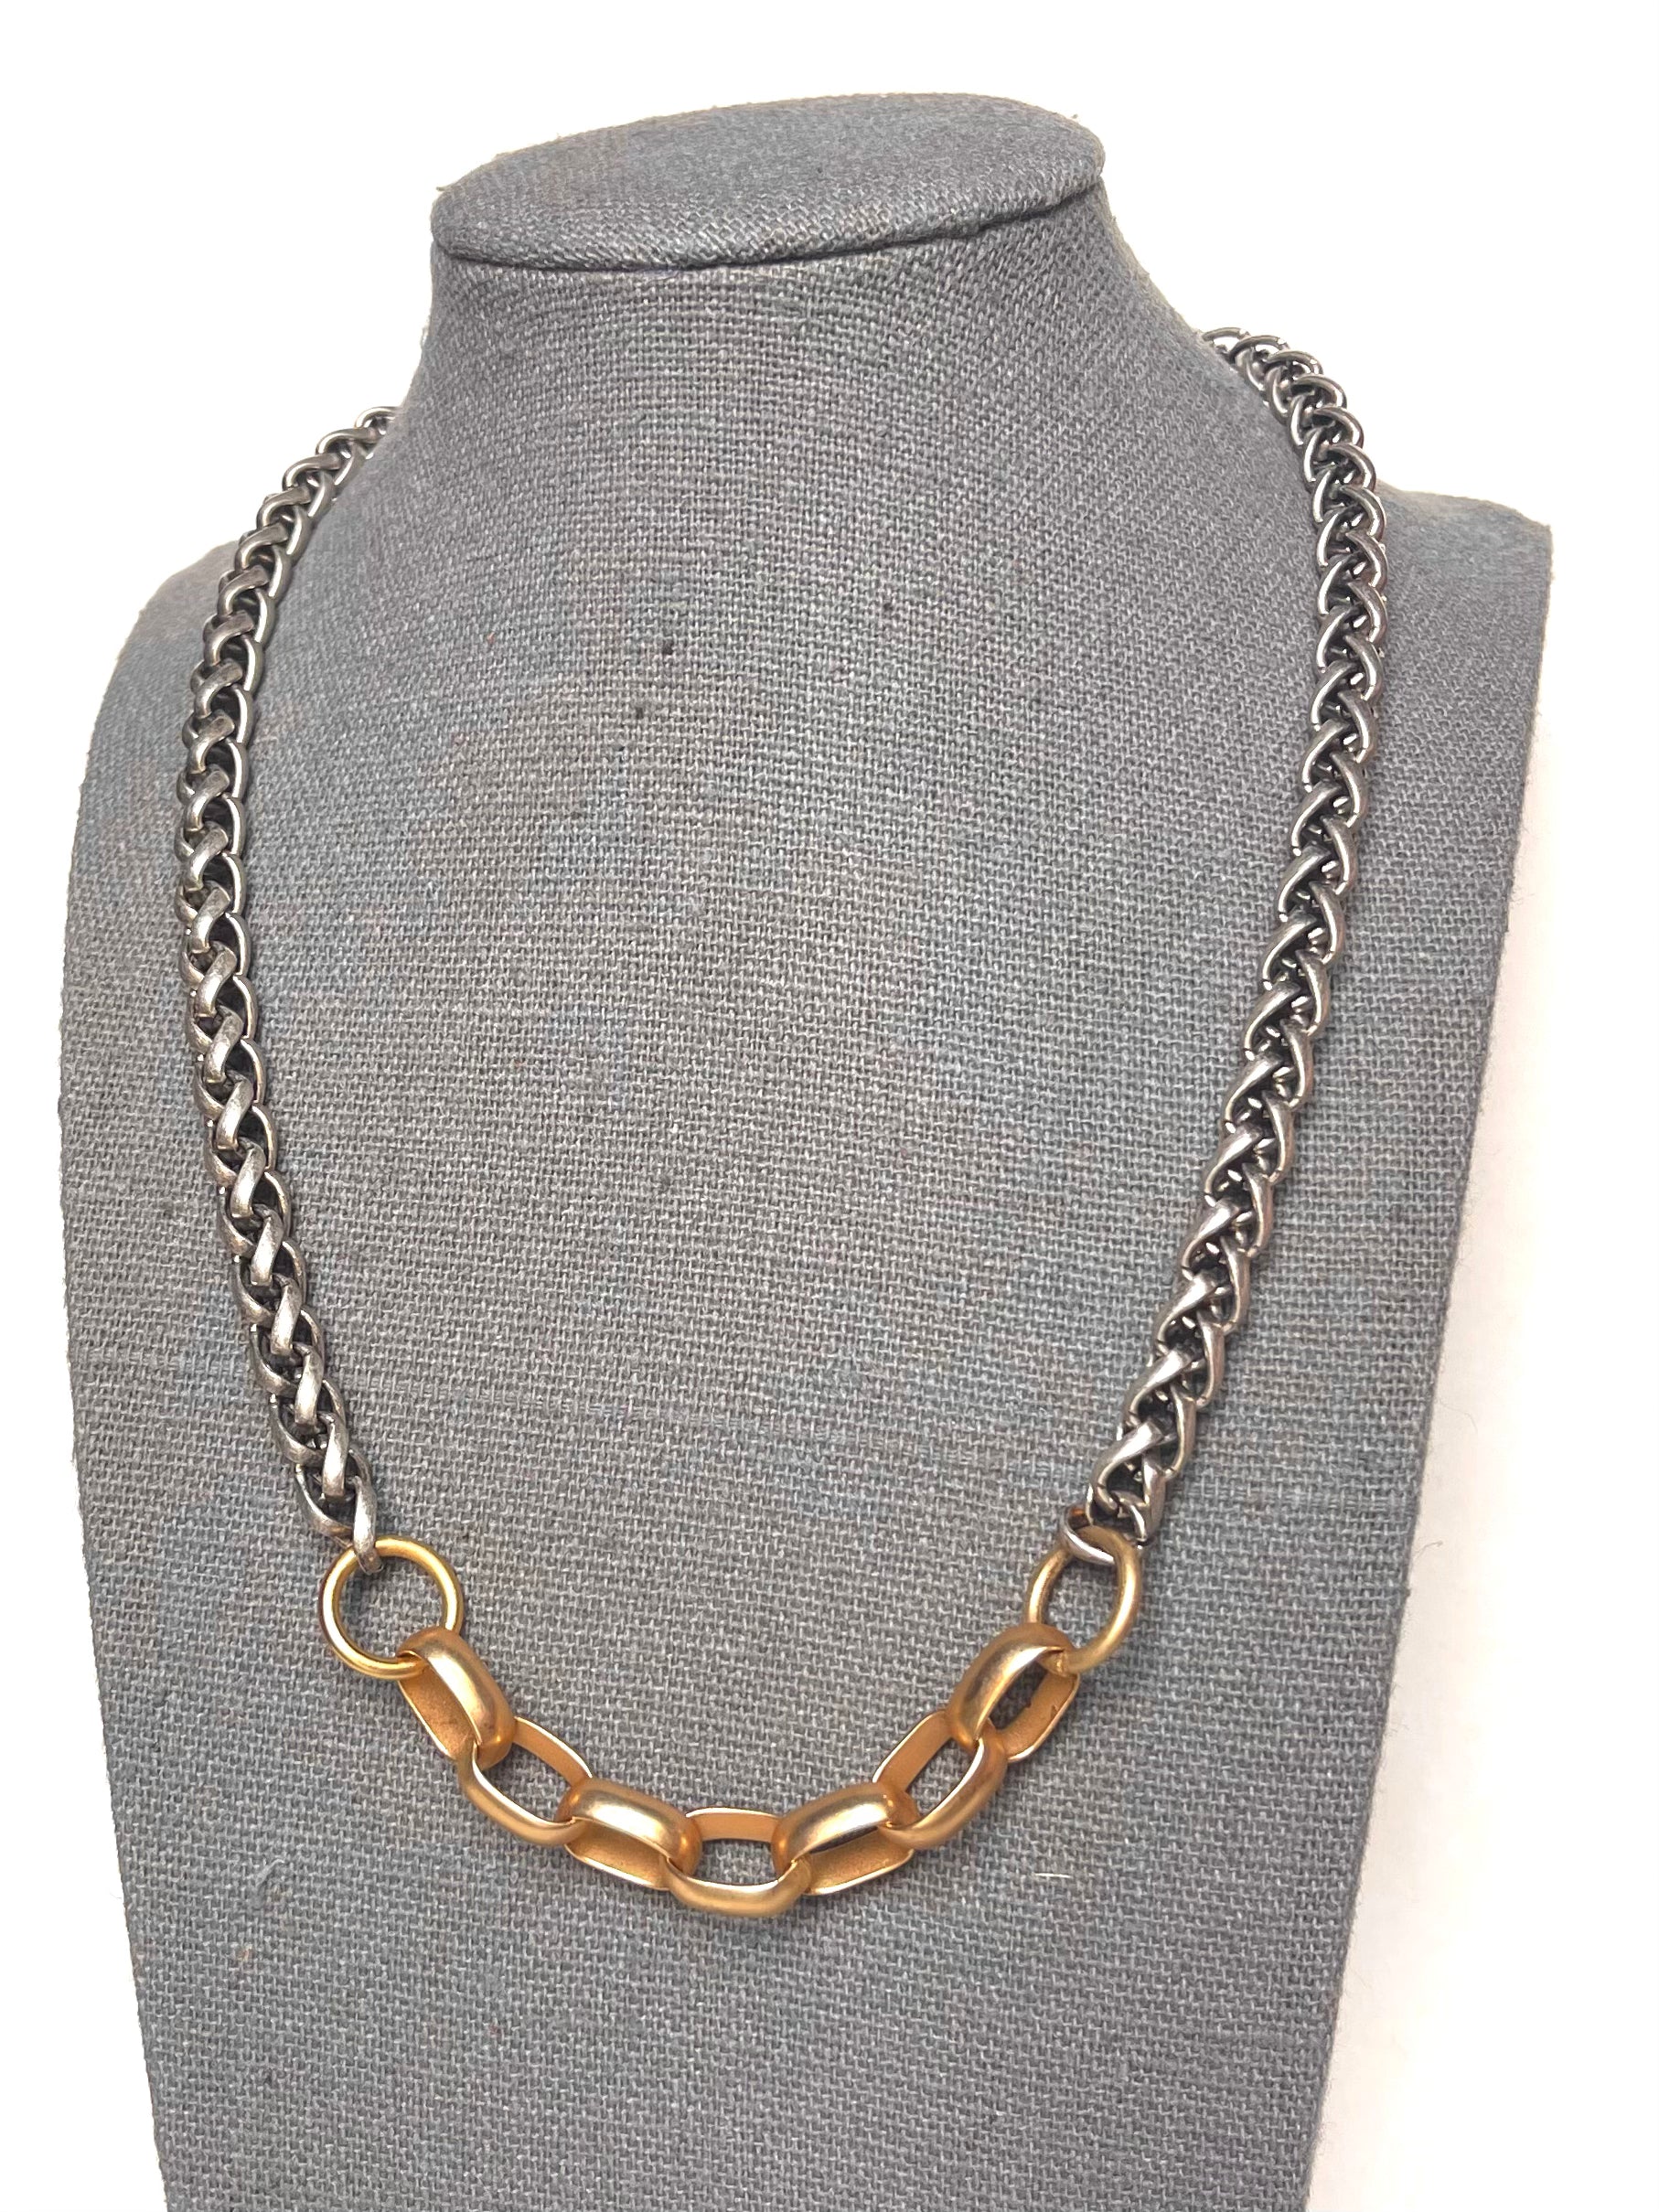 Chelsea - two-tone necklace